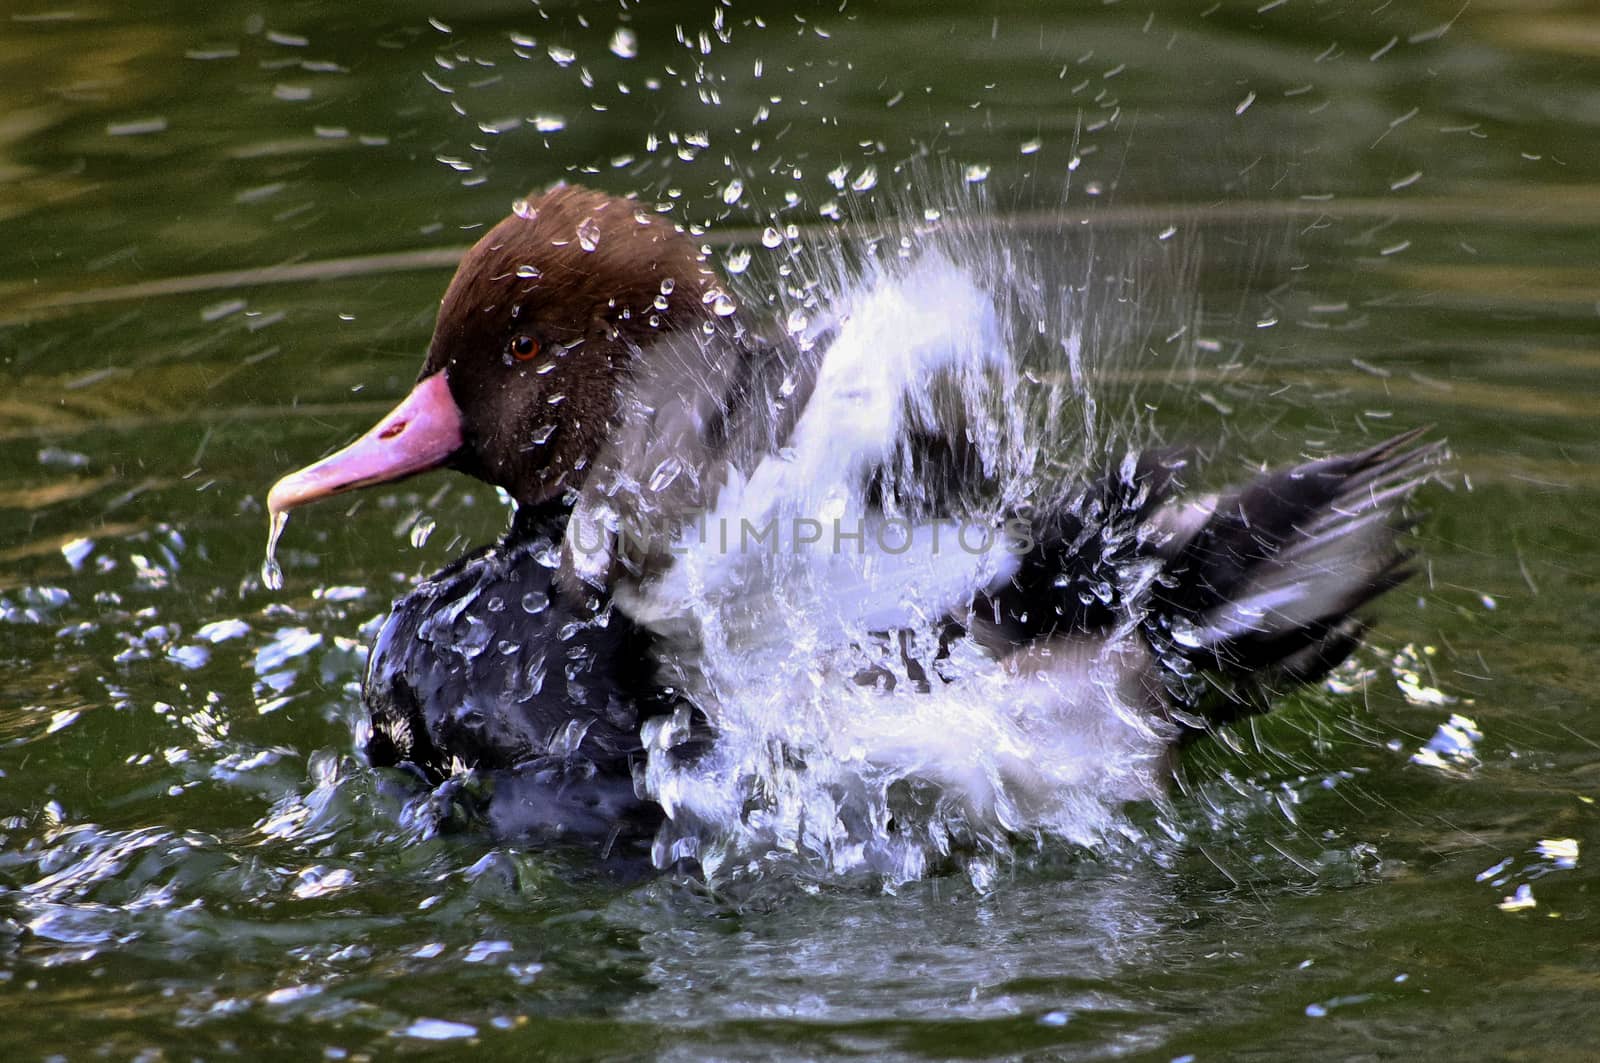 A Pochard duck joyfully flapping it's wings through the water.